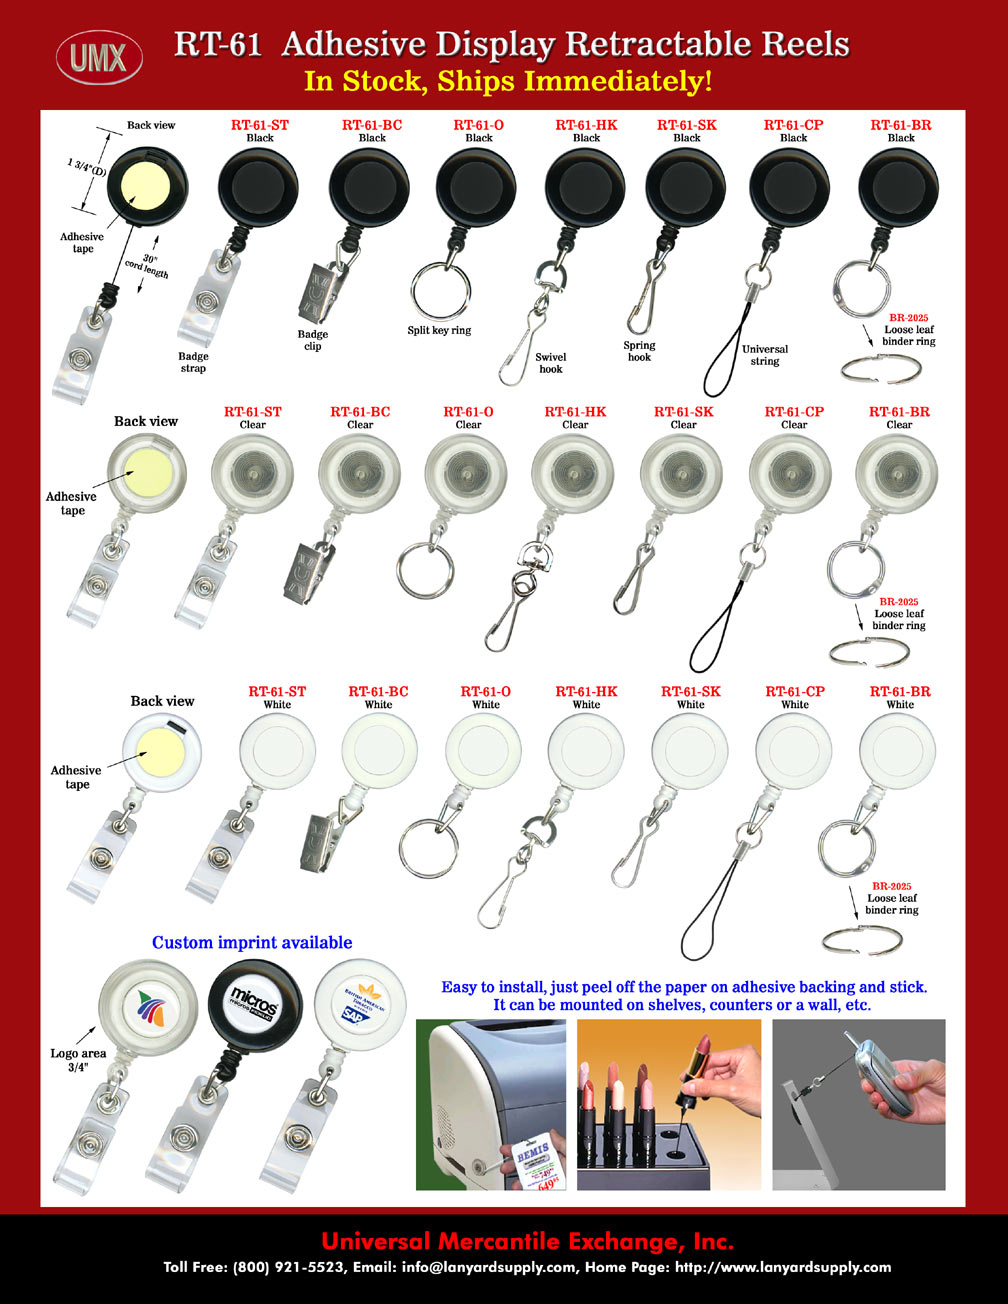 Adhesive Retractable Reels For Display Units - Adhesive Tapes Included